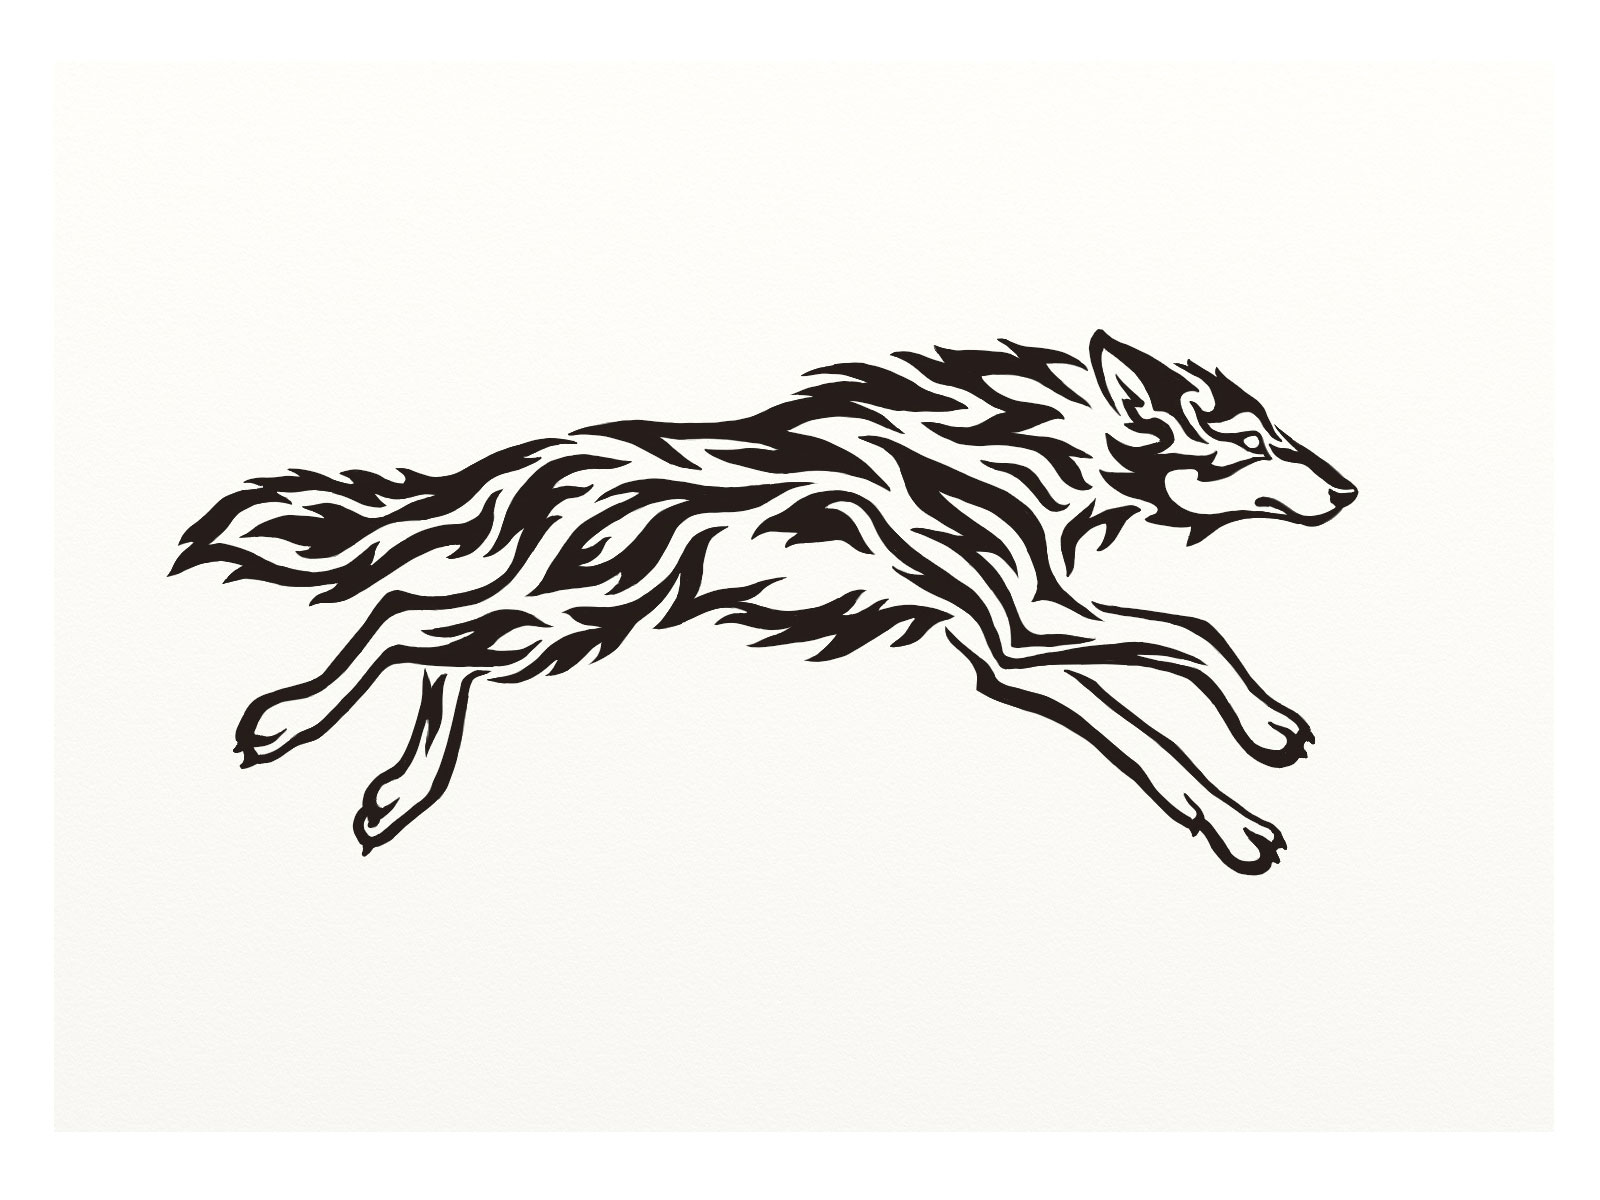 Howling Coyote Tattoo Commish by WildSpiritWolf on DeviantArt